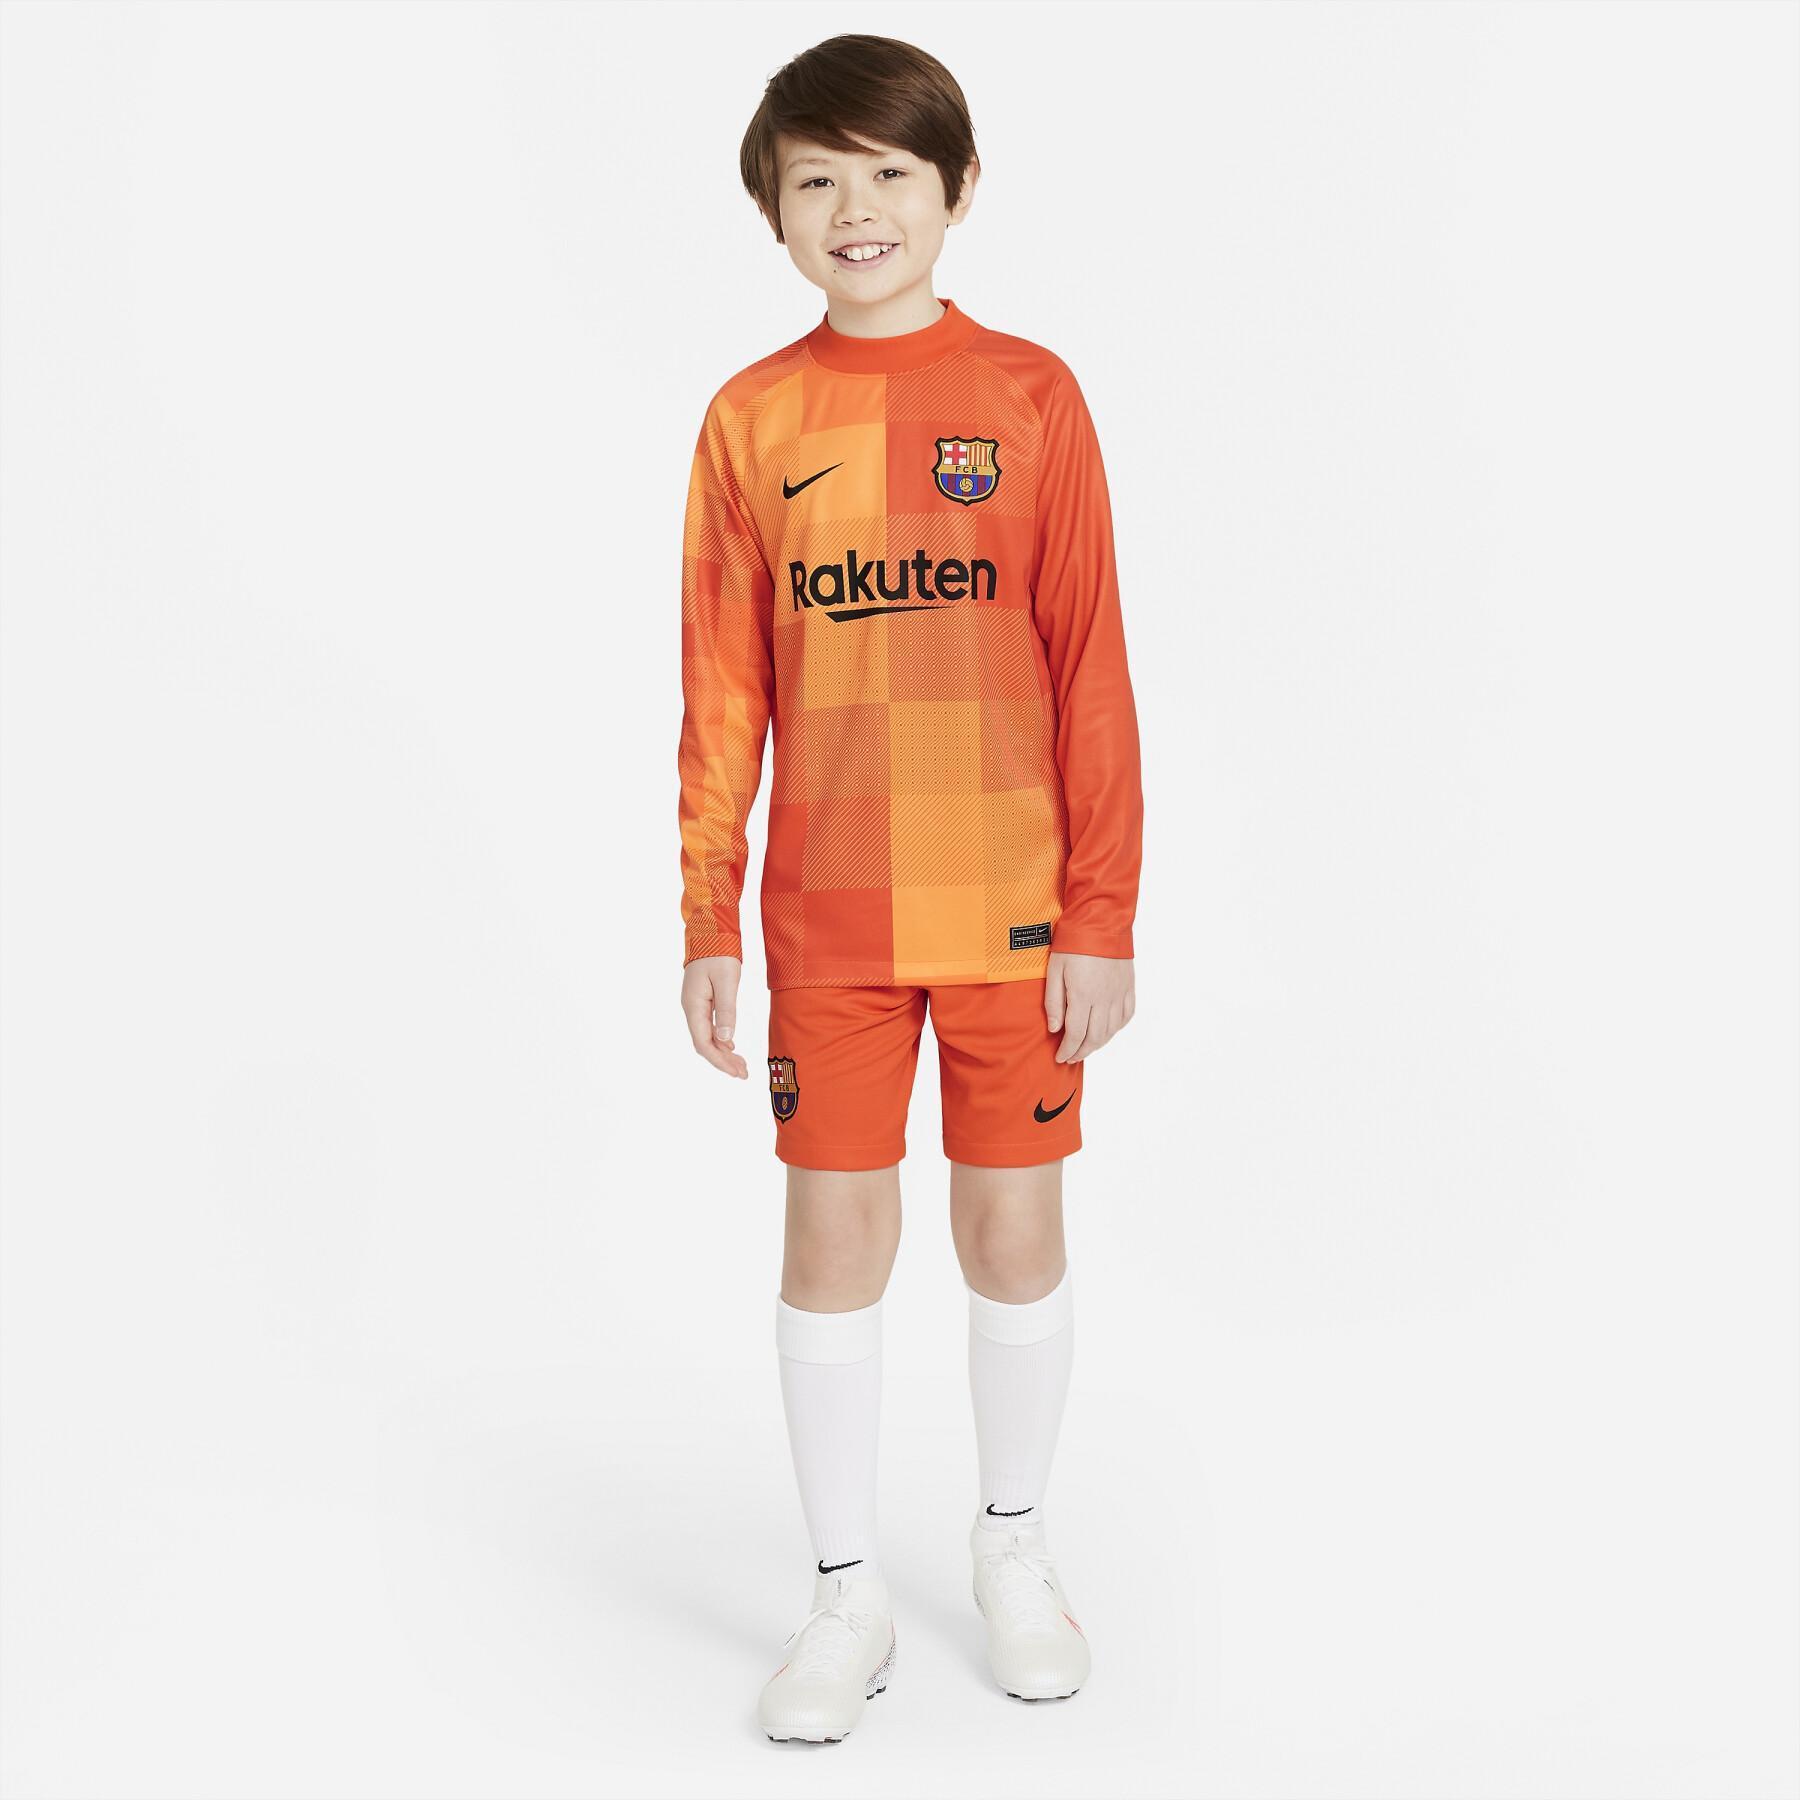 Home childcare shorts FC Barcelone 2021/22